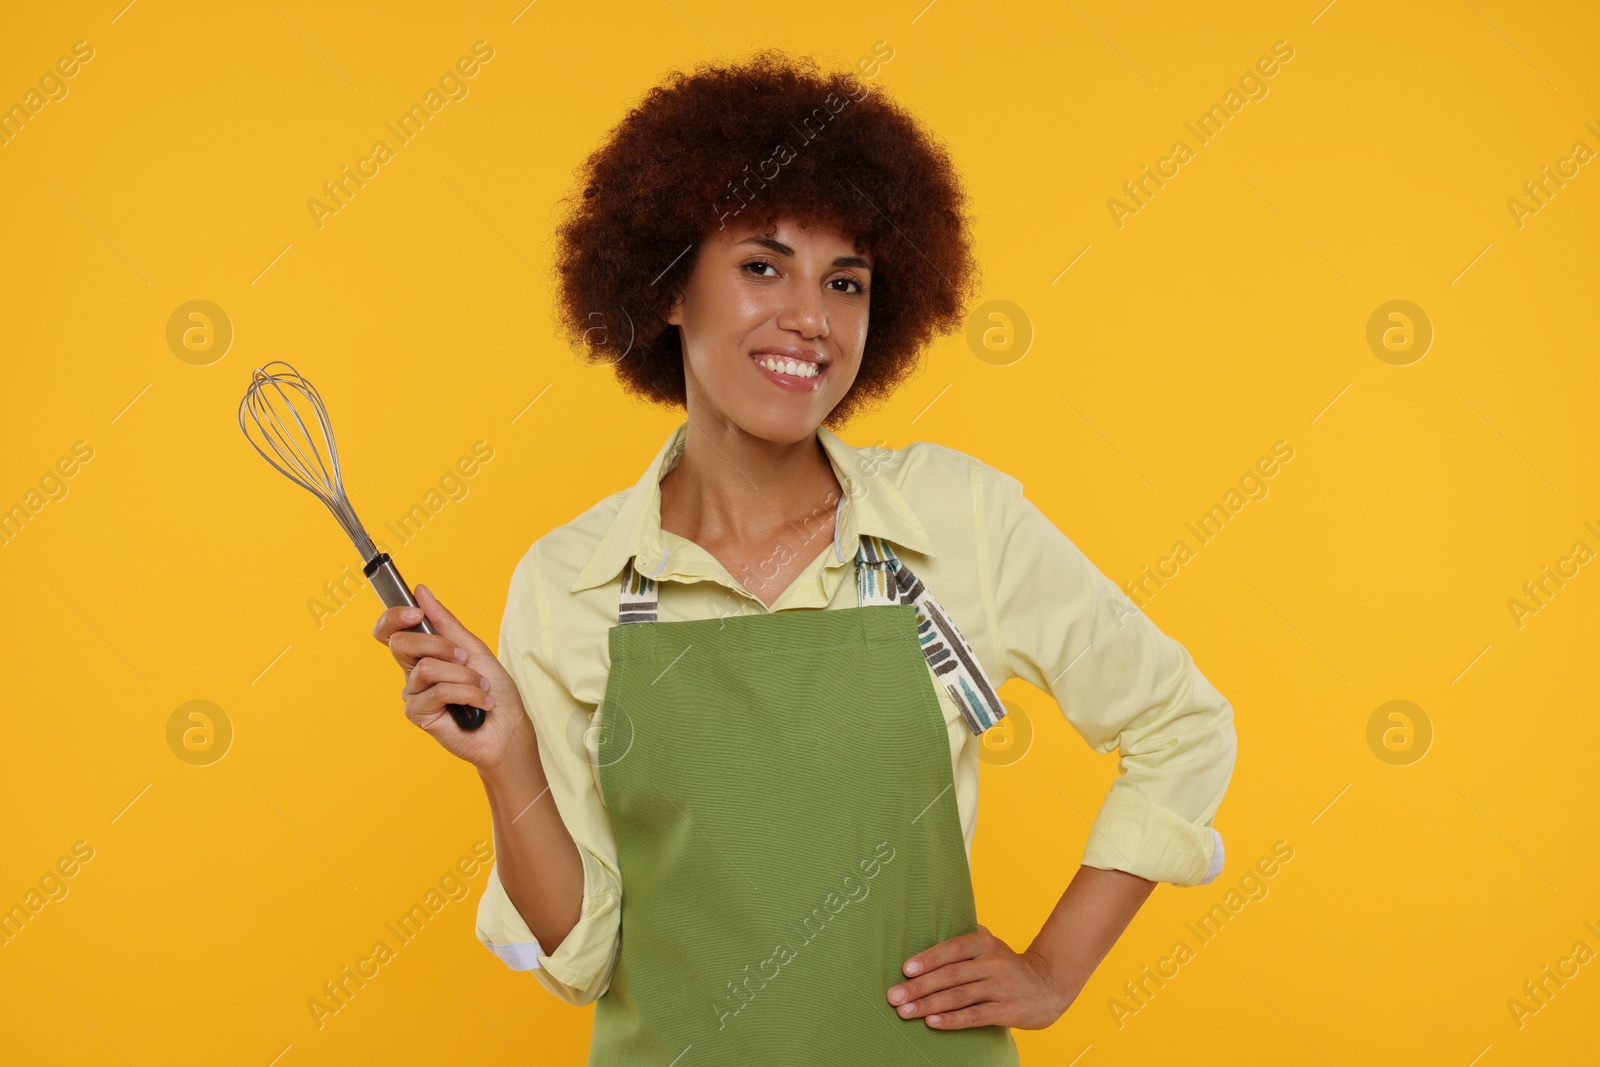 Photo of Happy young woman in apron holding whisk on orange background